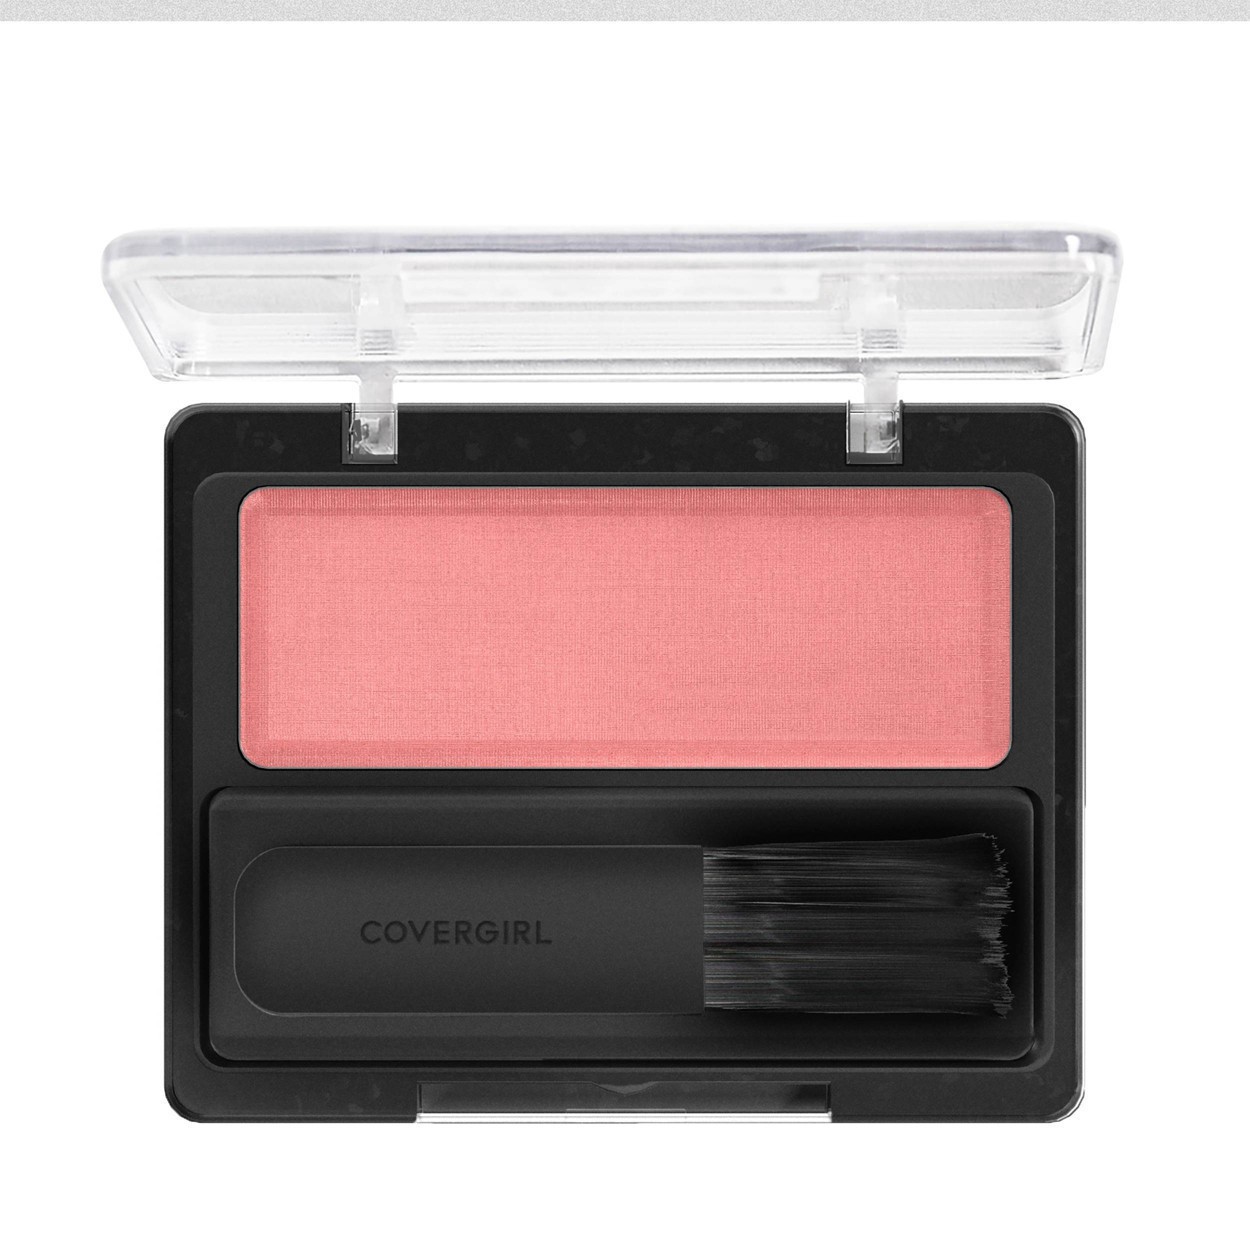 slide 23 of 42, COTY COVERGIRL COVERGIRL Classic Color Blush Rose Silk, 1 ct